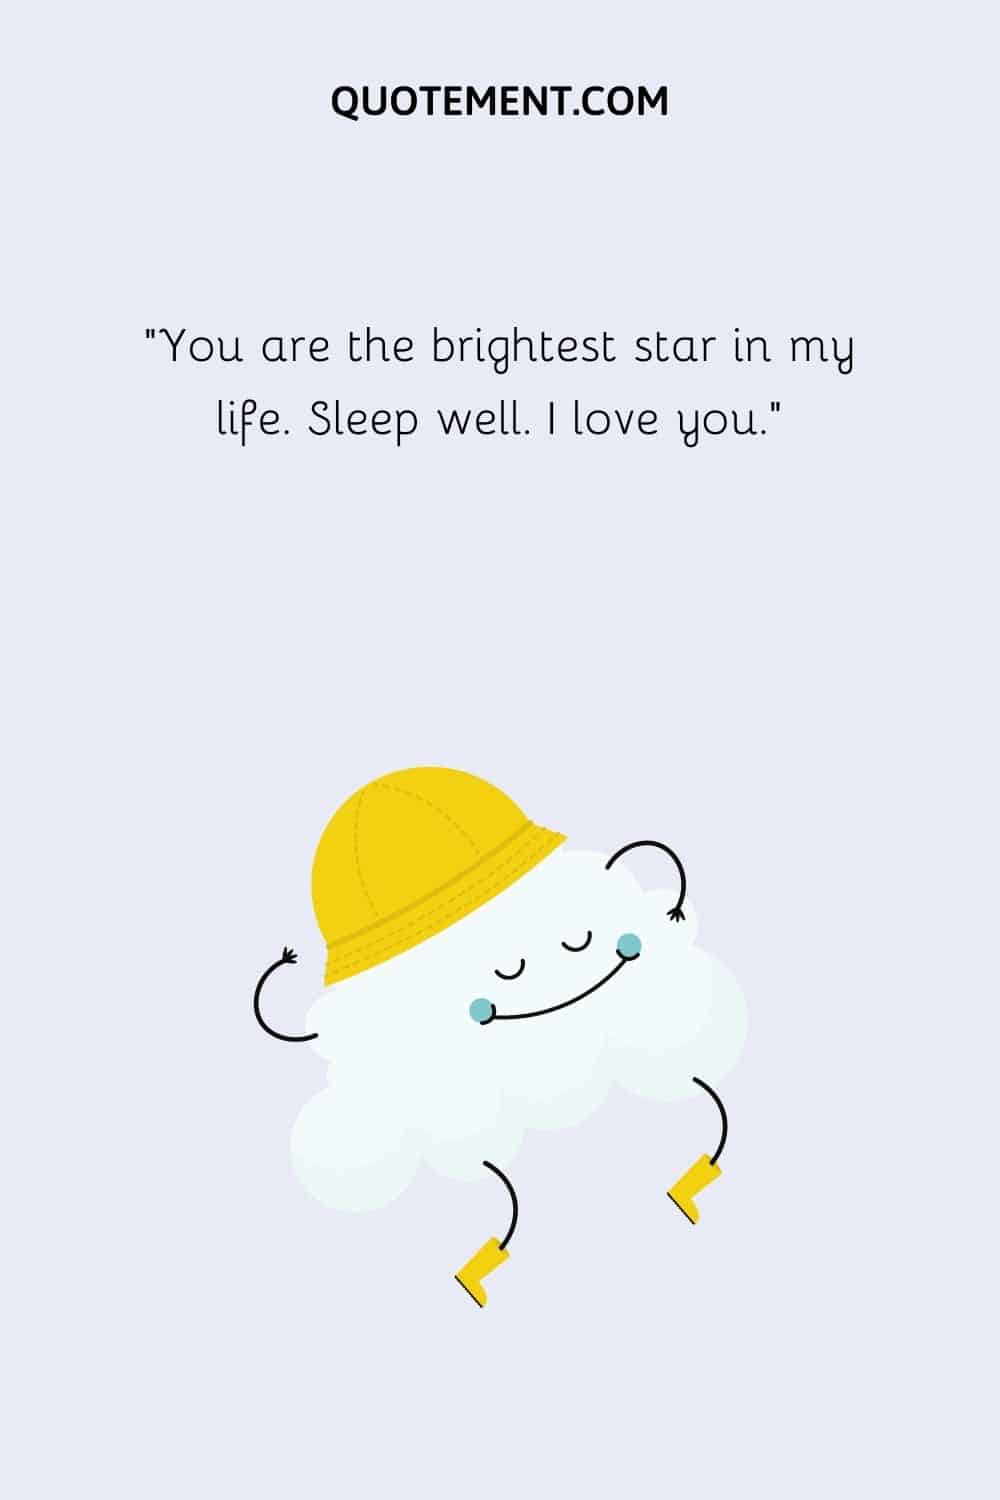 You are the brightest star in my life